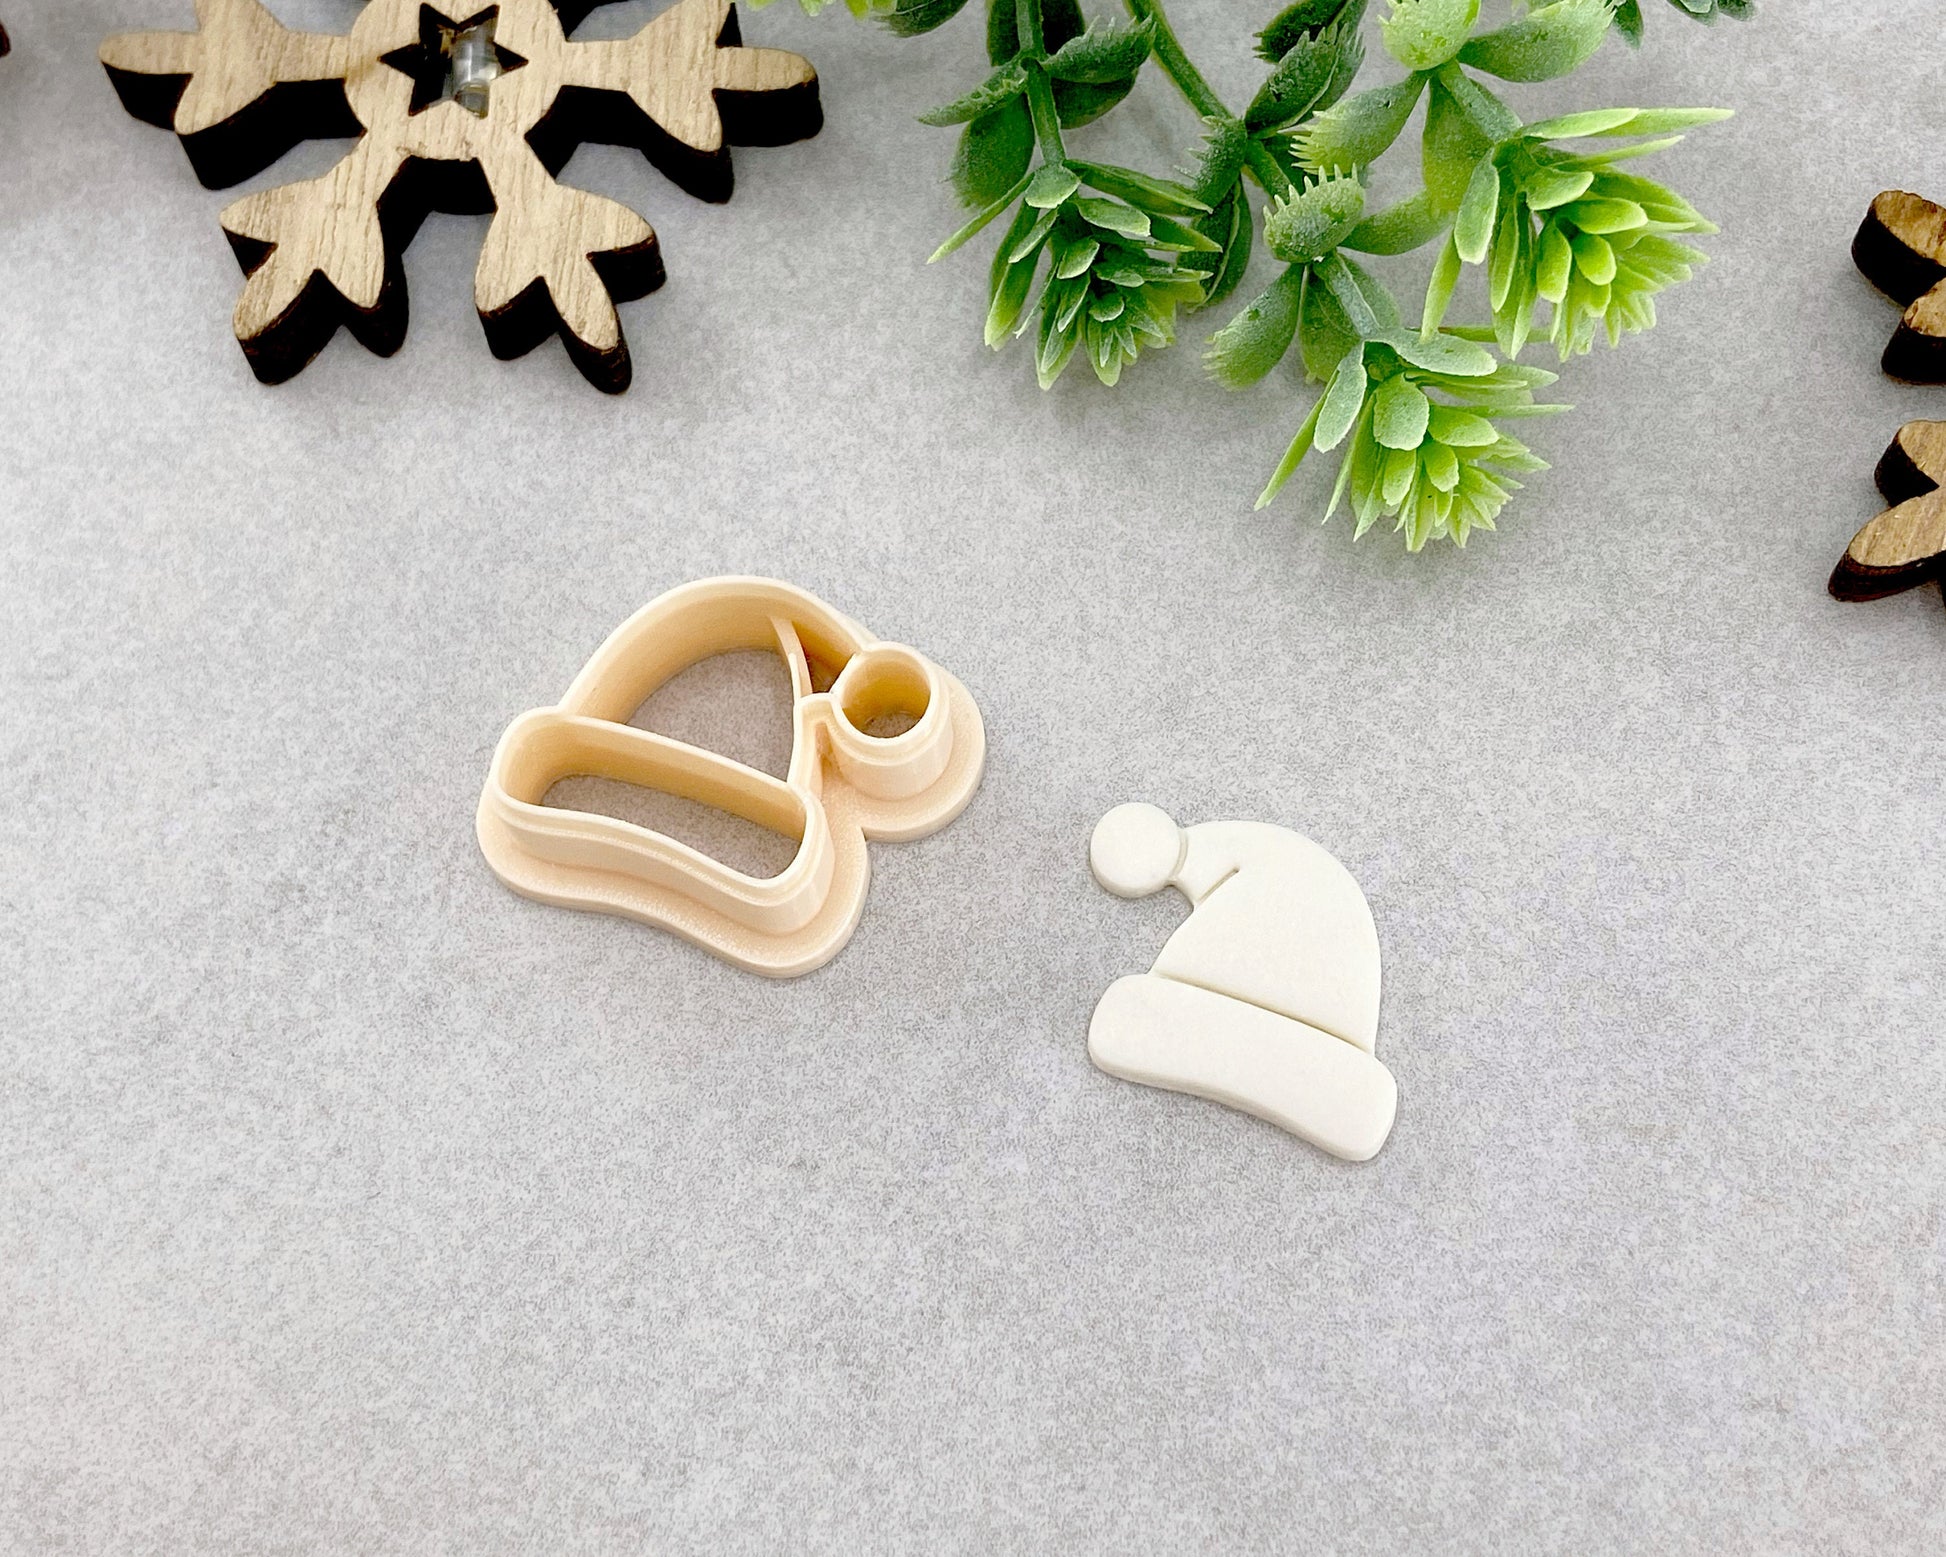 Christmas Polymer Clay Earring Cutter Collection (11 Cutters) Set